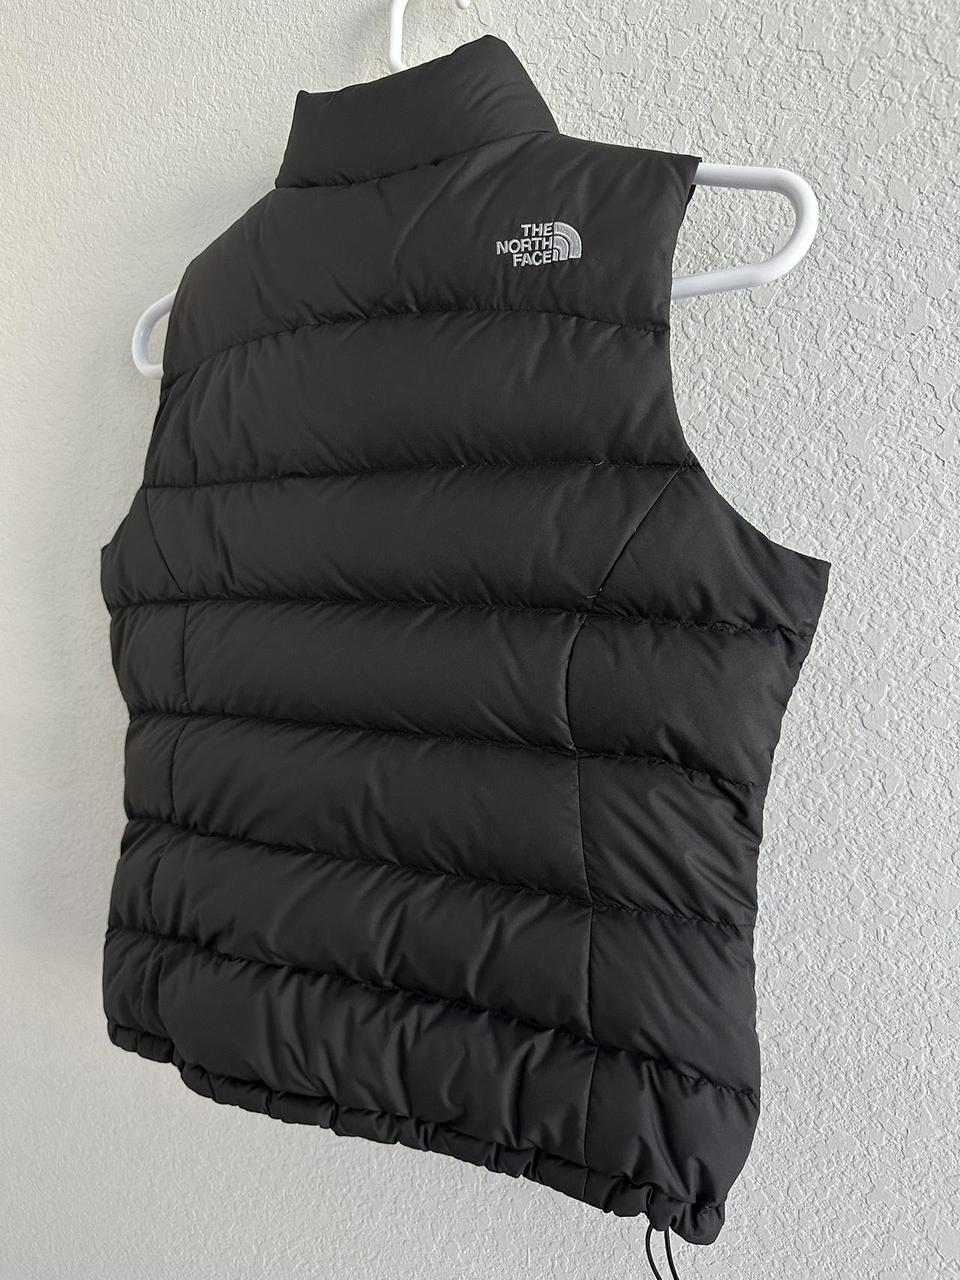 The North Face 700 Down Fill Puffer Vest Size... - Depop